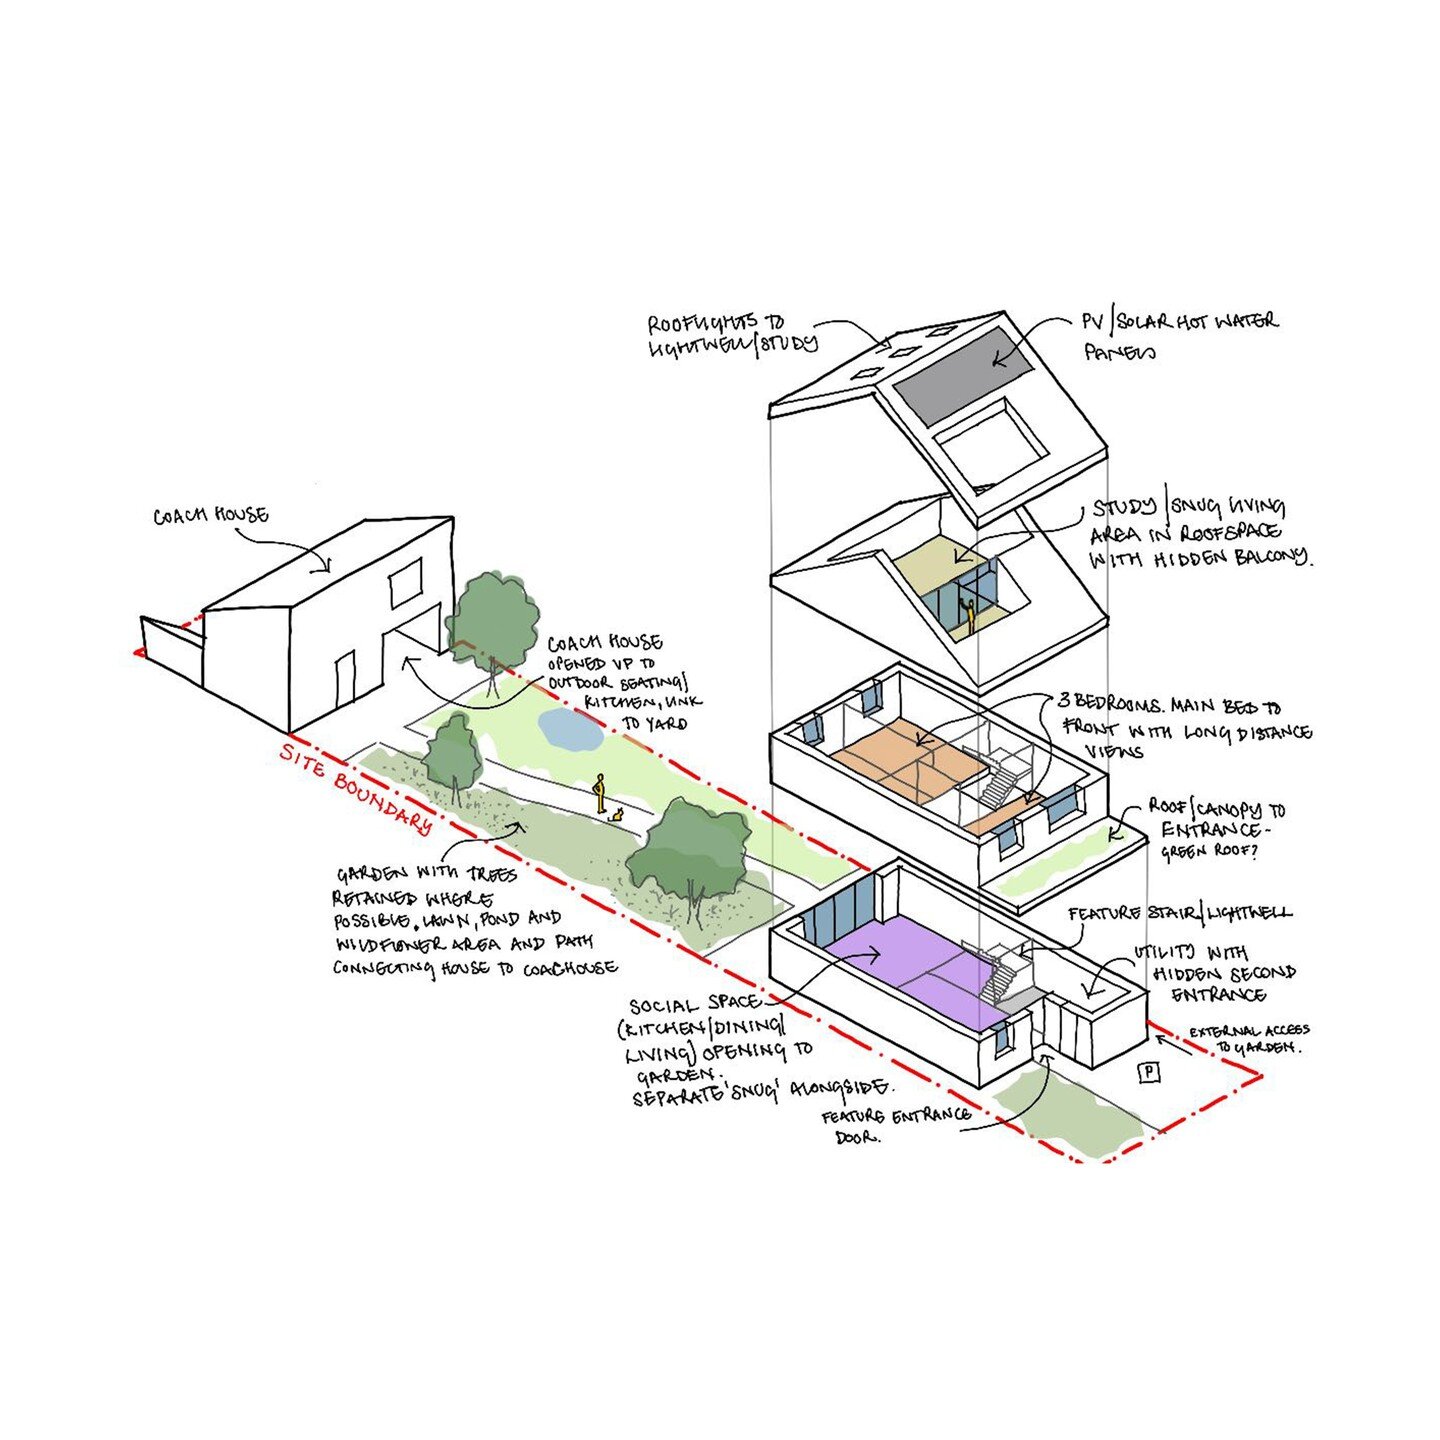 Design process from initial briefing meeting through to planning submission for a self-build Passivhaus in Sheffield.

This project creates of a high performing family home on a former garden site. We have worked with the clients to express and refin